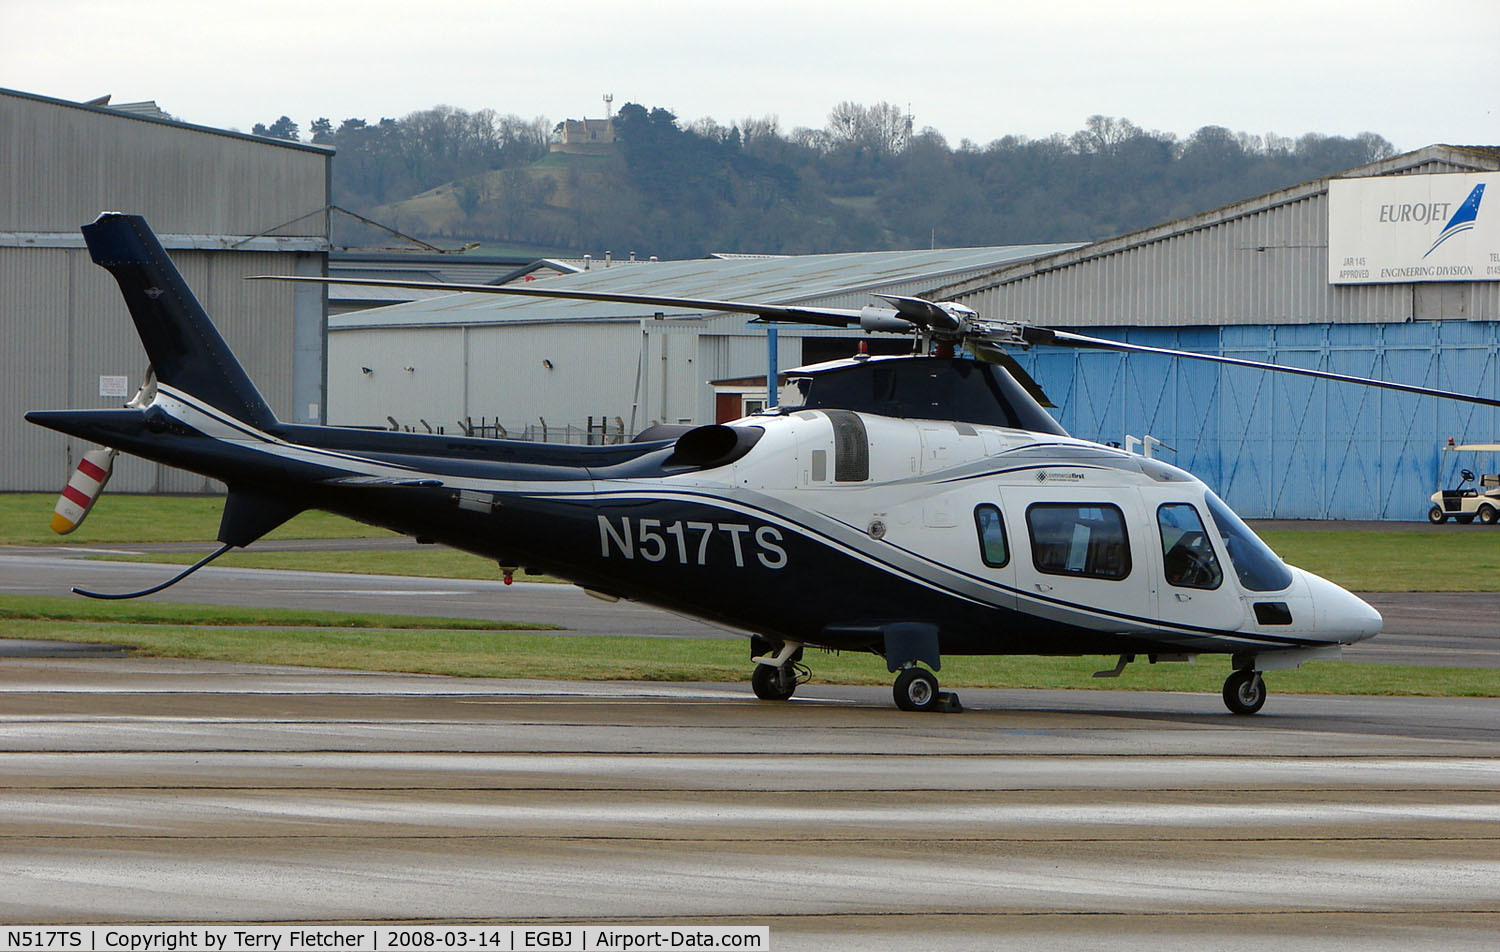 N517TS, 1999 Agusta A-109E C/N 11057, A visitor to Gloucestershire Airport on the day of the horse racing Gold Cup  at the nearby Cheltenham Racecourse